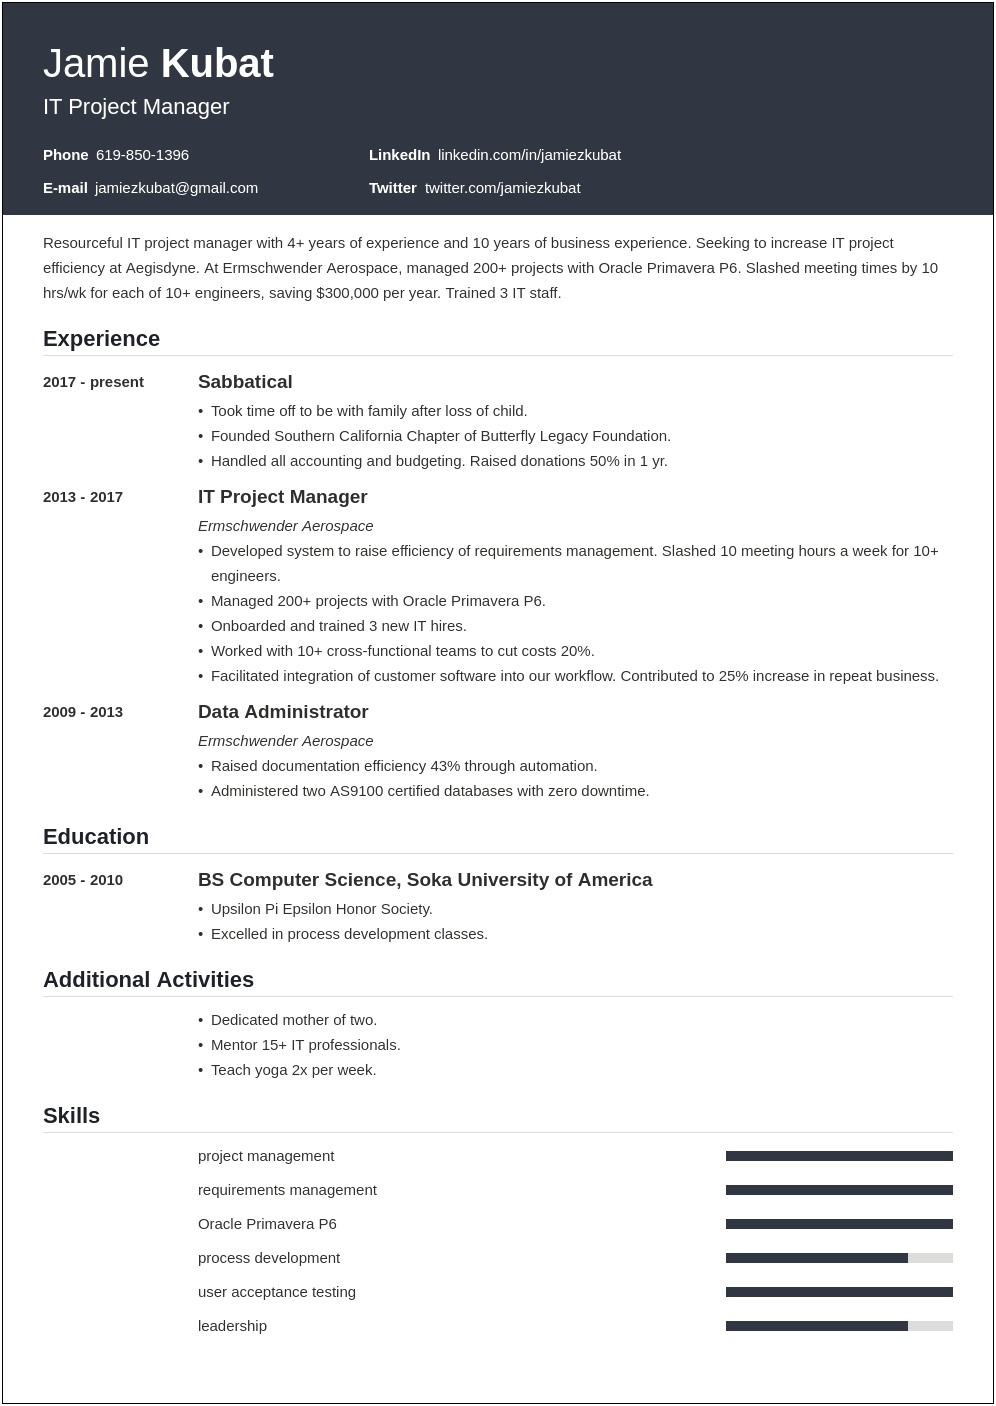 Resume With Gaps Due To School